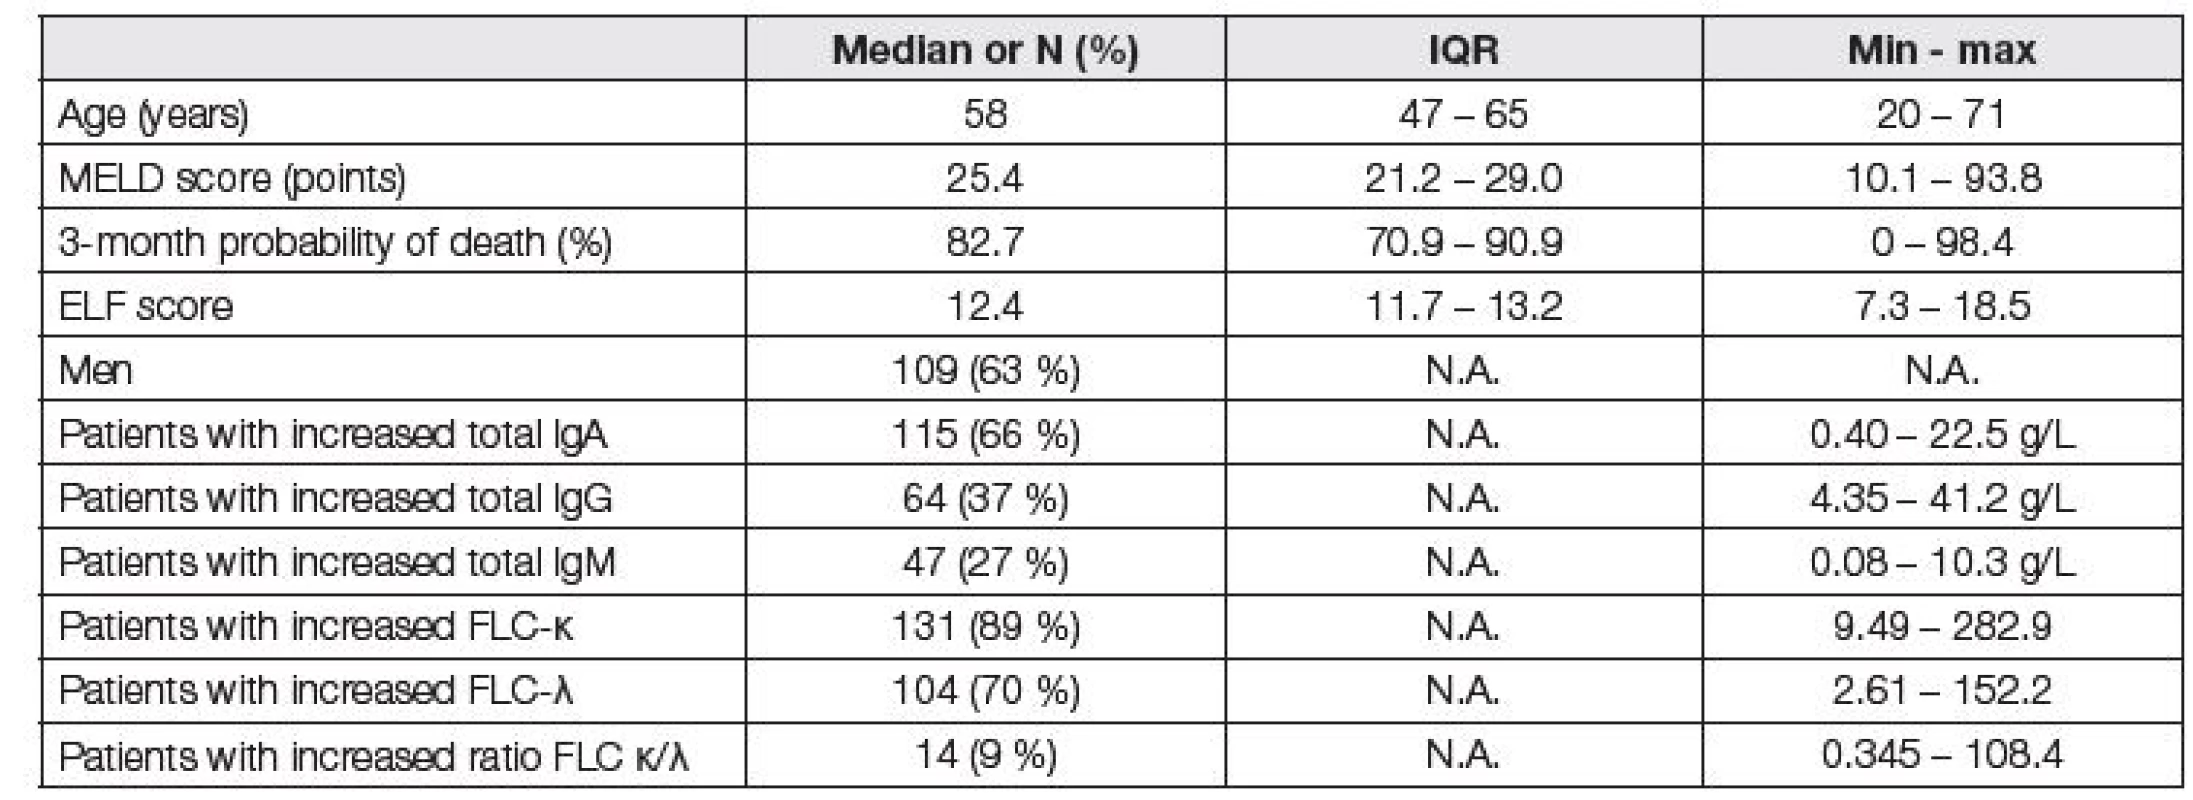 Basic characteristics of patients before LTx (N=174). There were 2, 2, and 4 patients with decreased IgA, IgG, and
IgM, respectively, and 1 patient with decreased FLC-λ. Reference values for immunoglobulins were sex-specific, reference
values for FLC κ/λ ratio were chosen with respect to the eGFR (CKD-EPI equation).